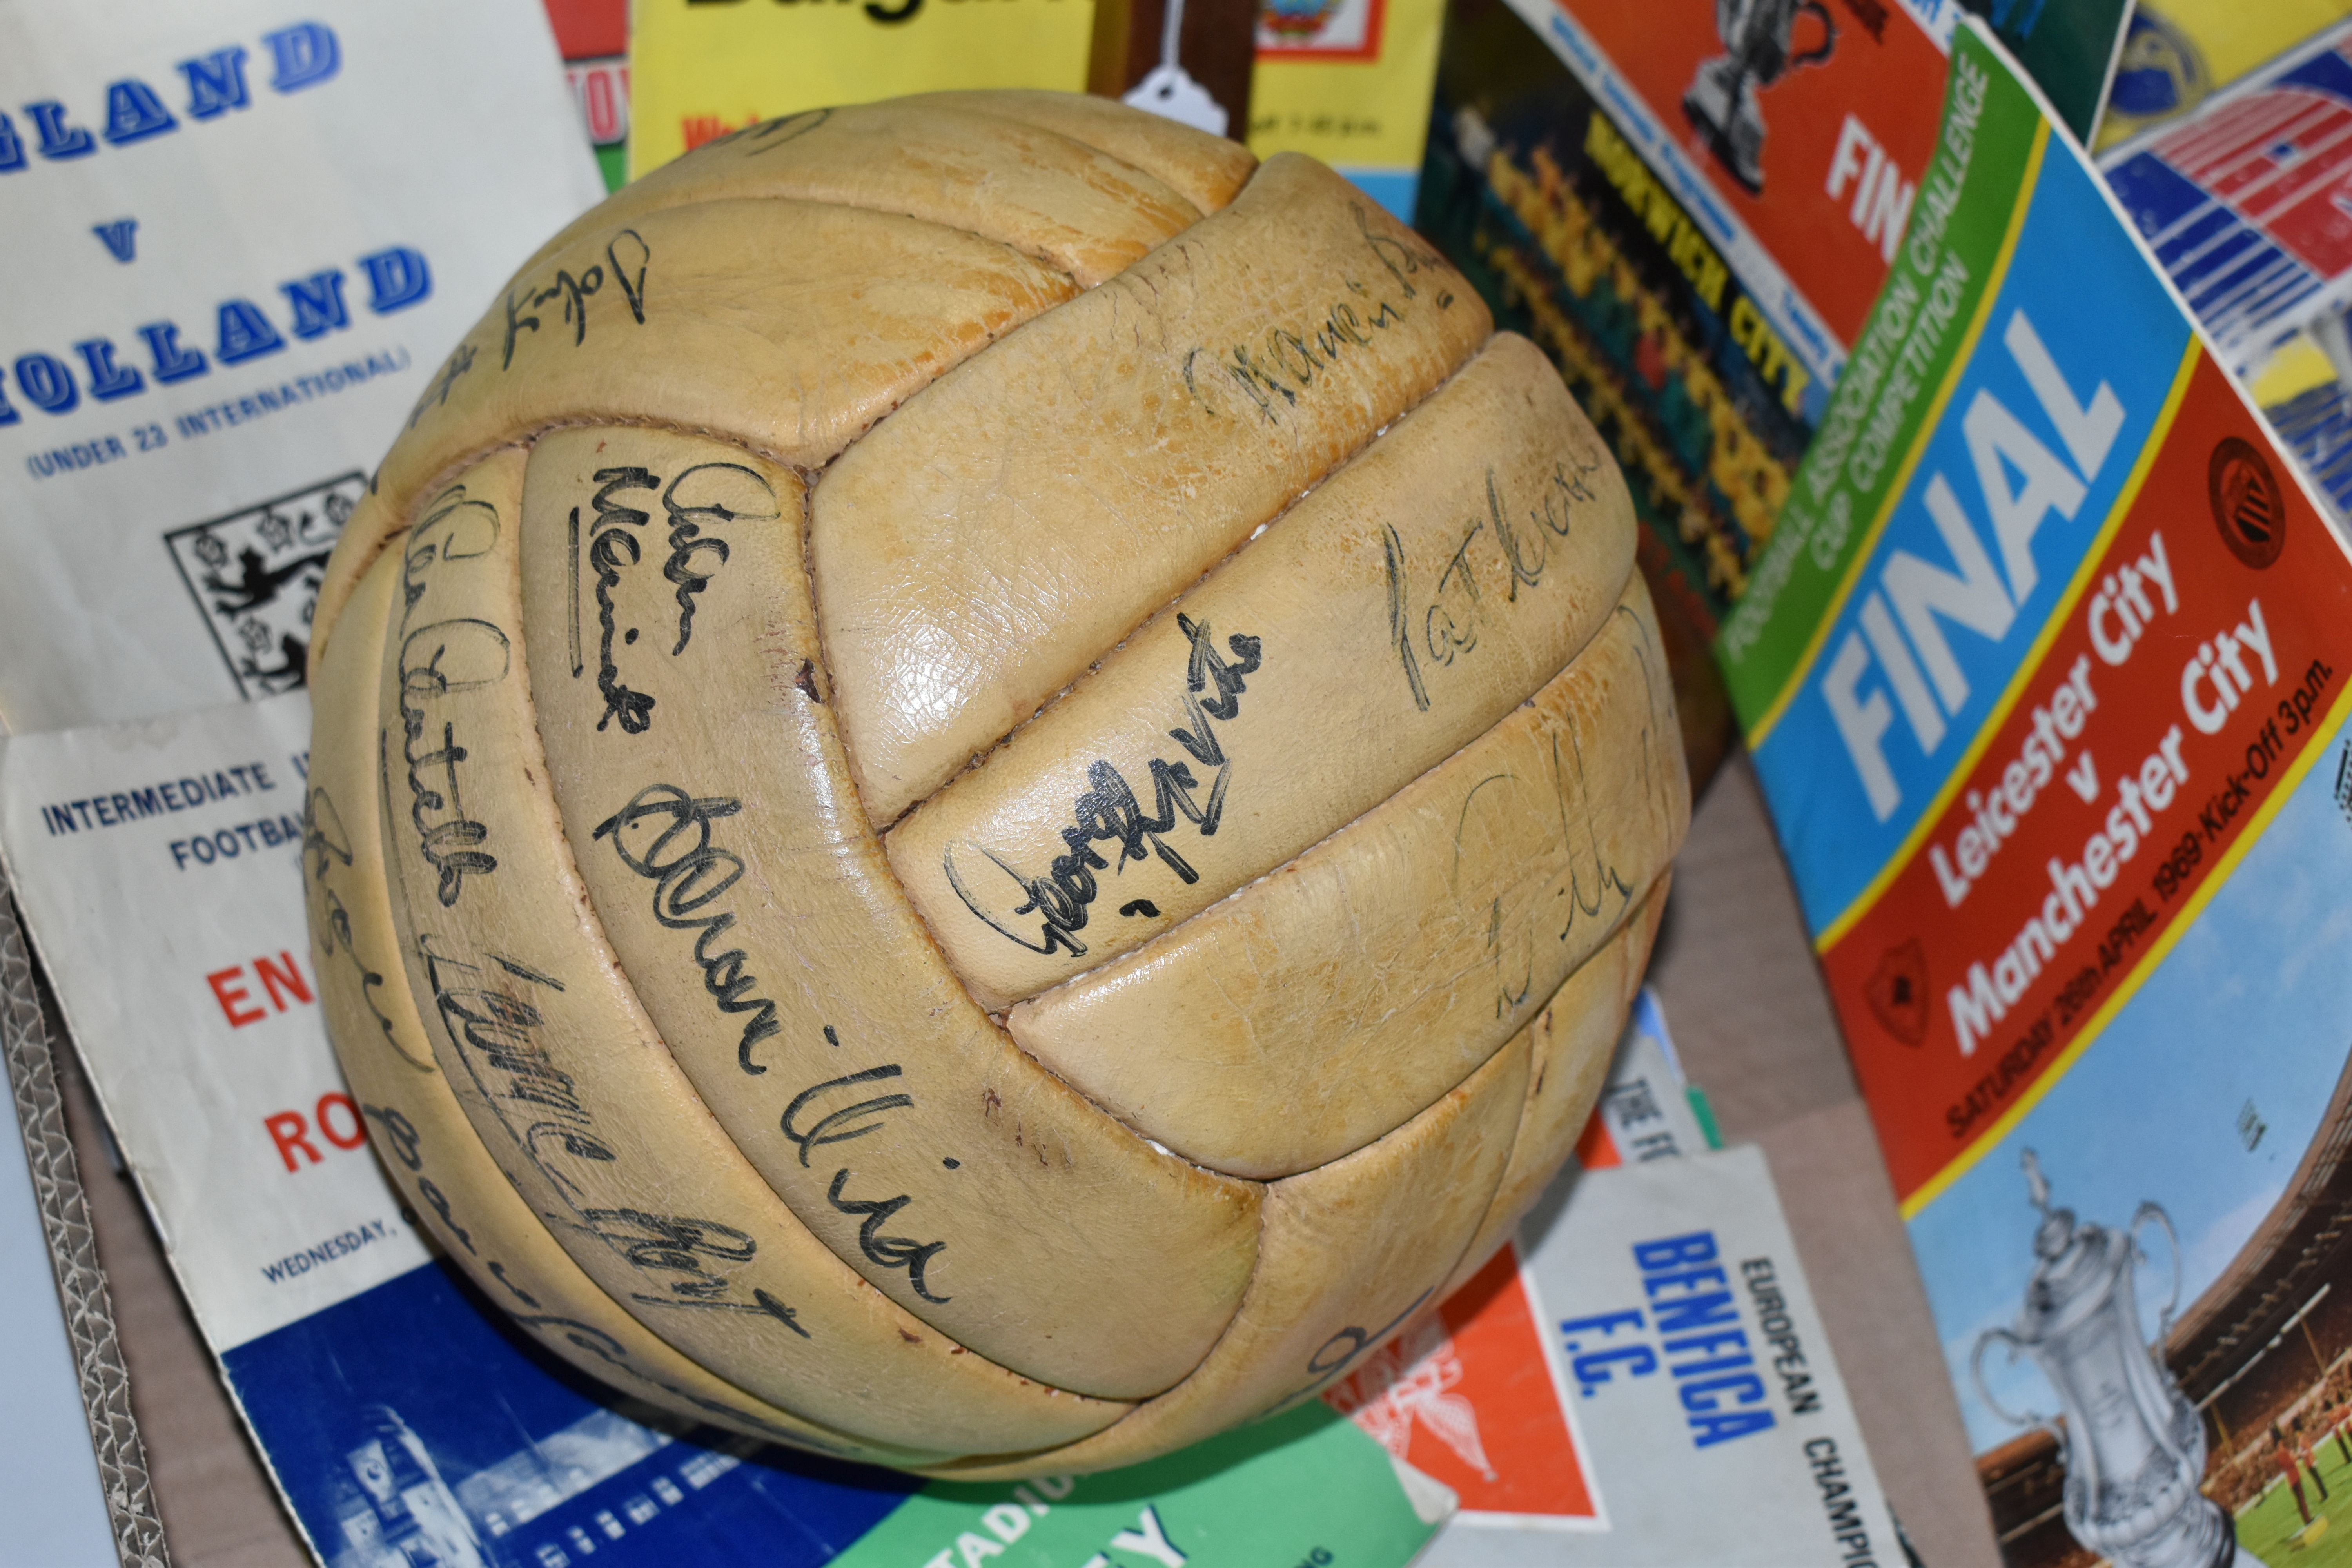 A SIGNED FOOTBALL, match ball signed by the players from the West Bromwich Albion v. Manchester Utd. - Image 4 of 5